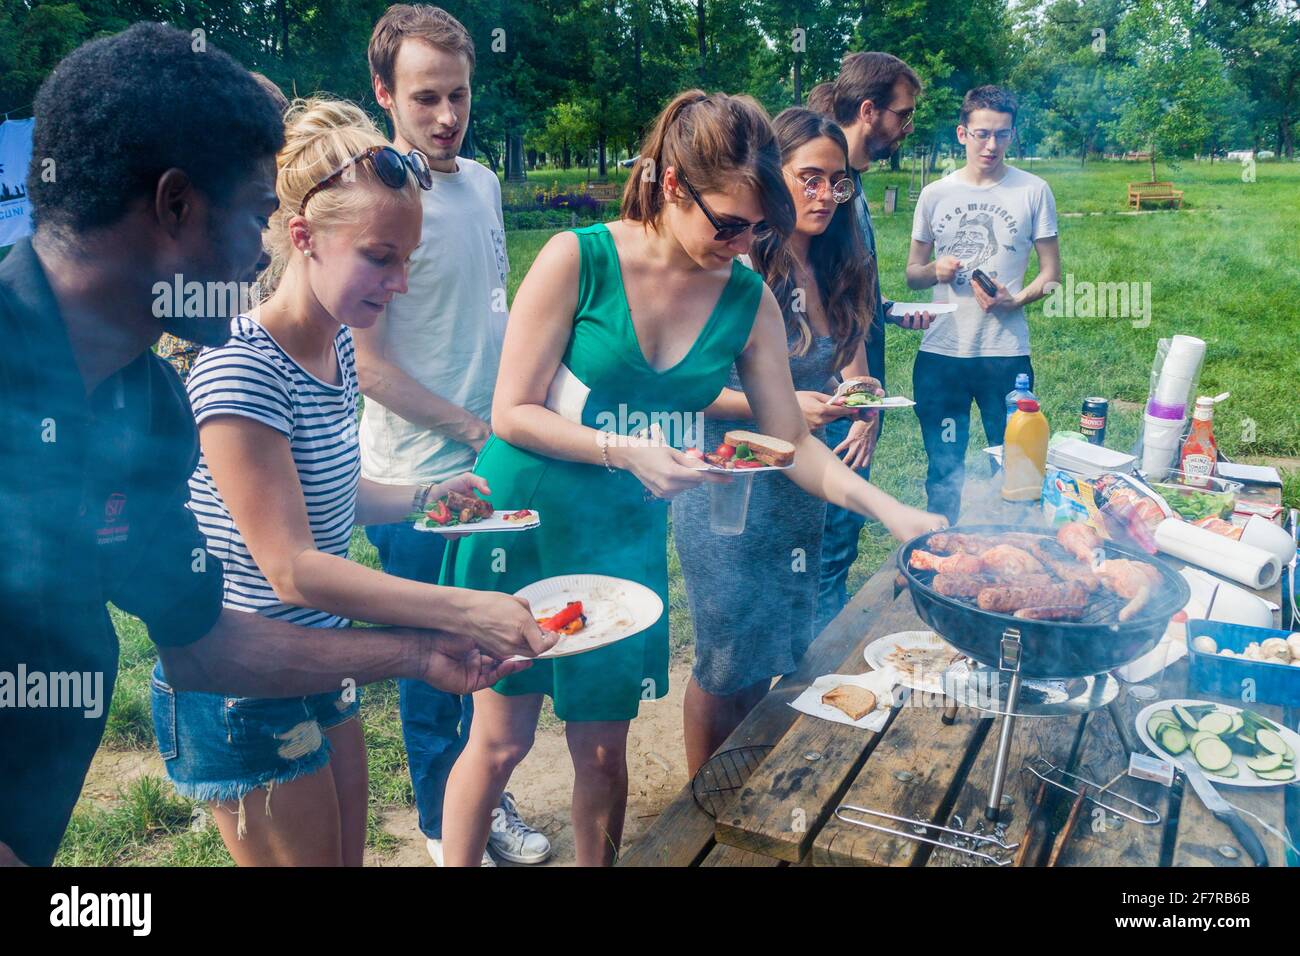 Barbecue party stock photo. Image of outdoor, eating - 54266456